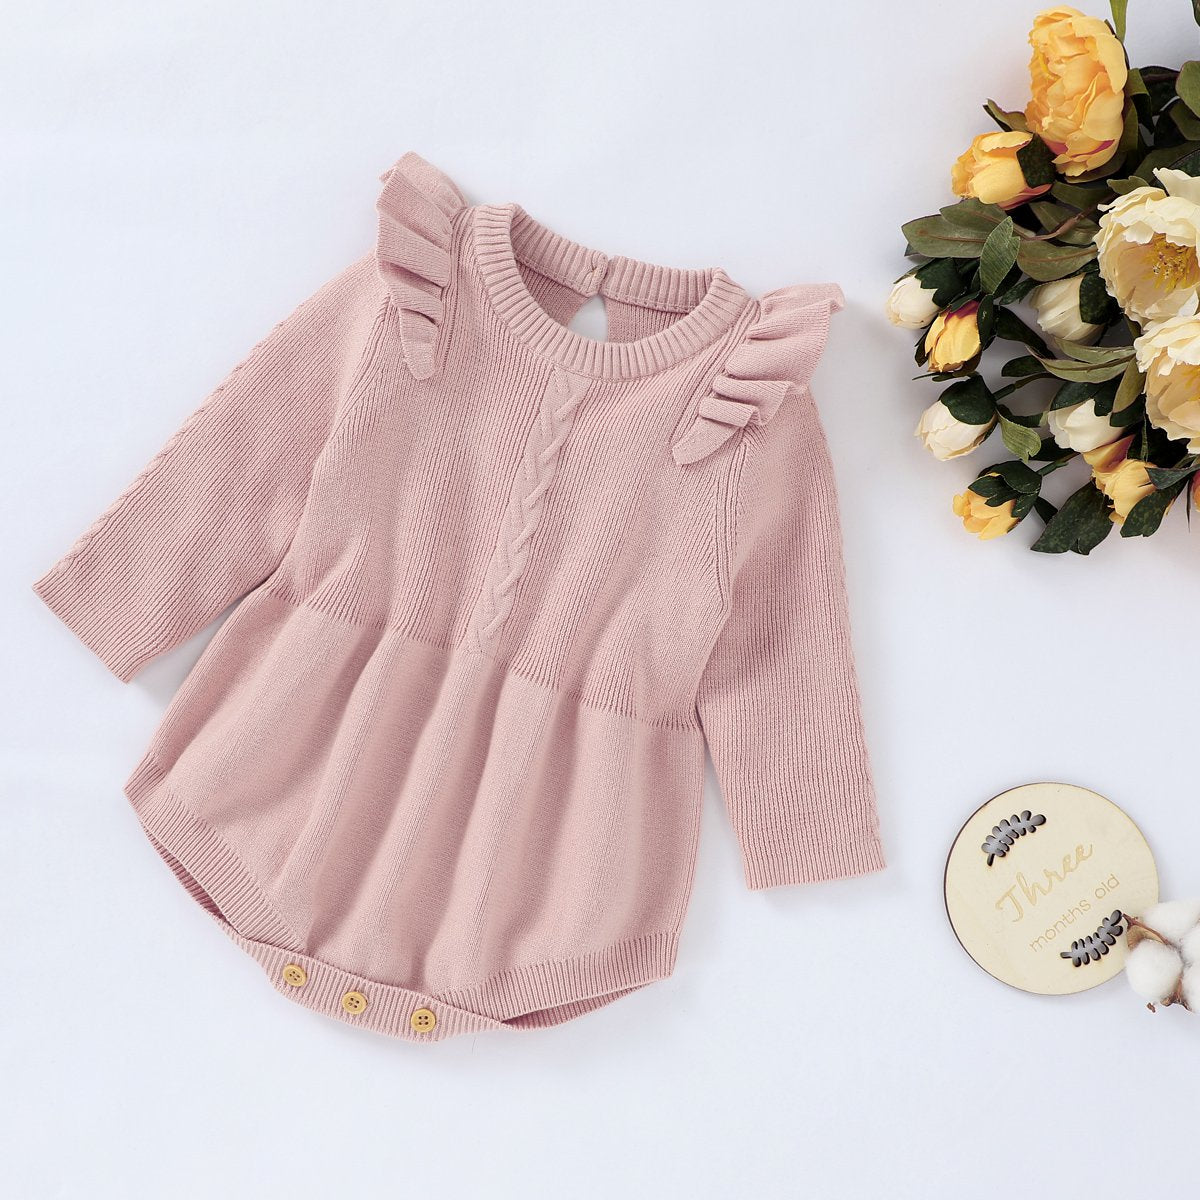 Baby Girl Knitted Sweater Romper.